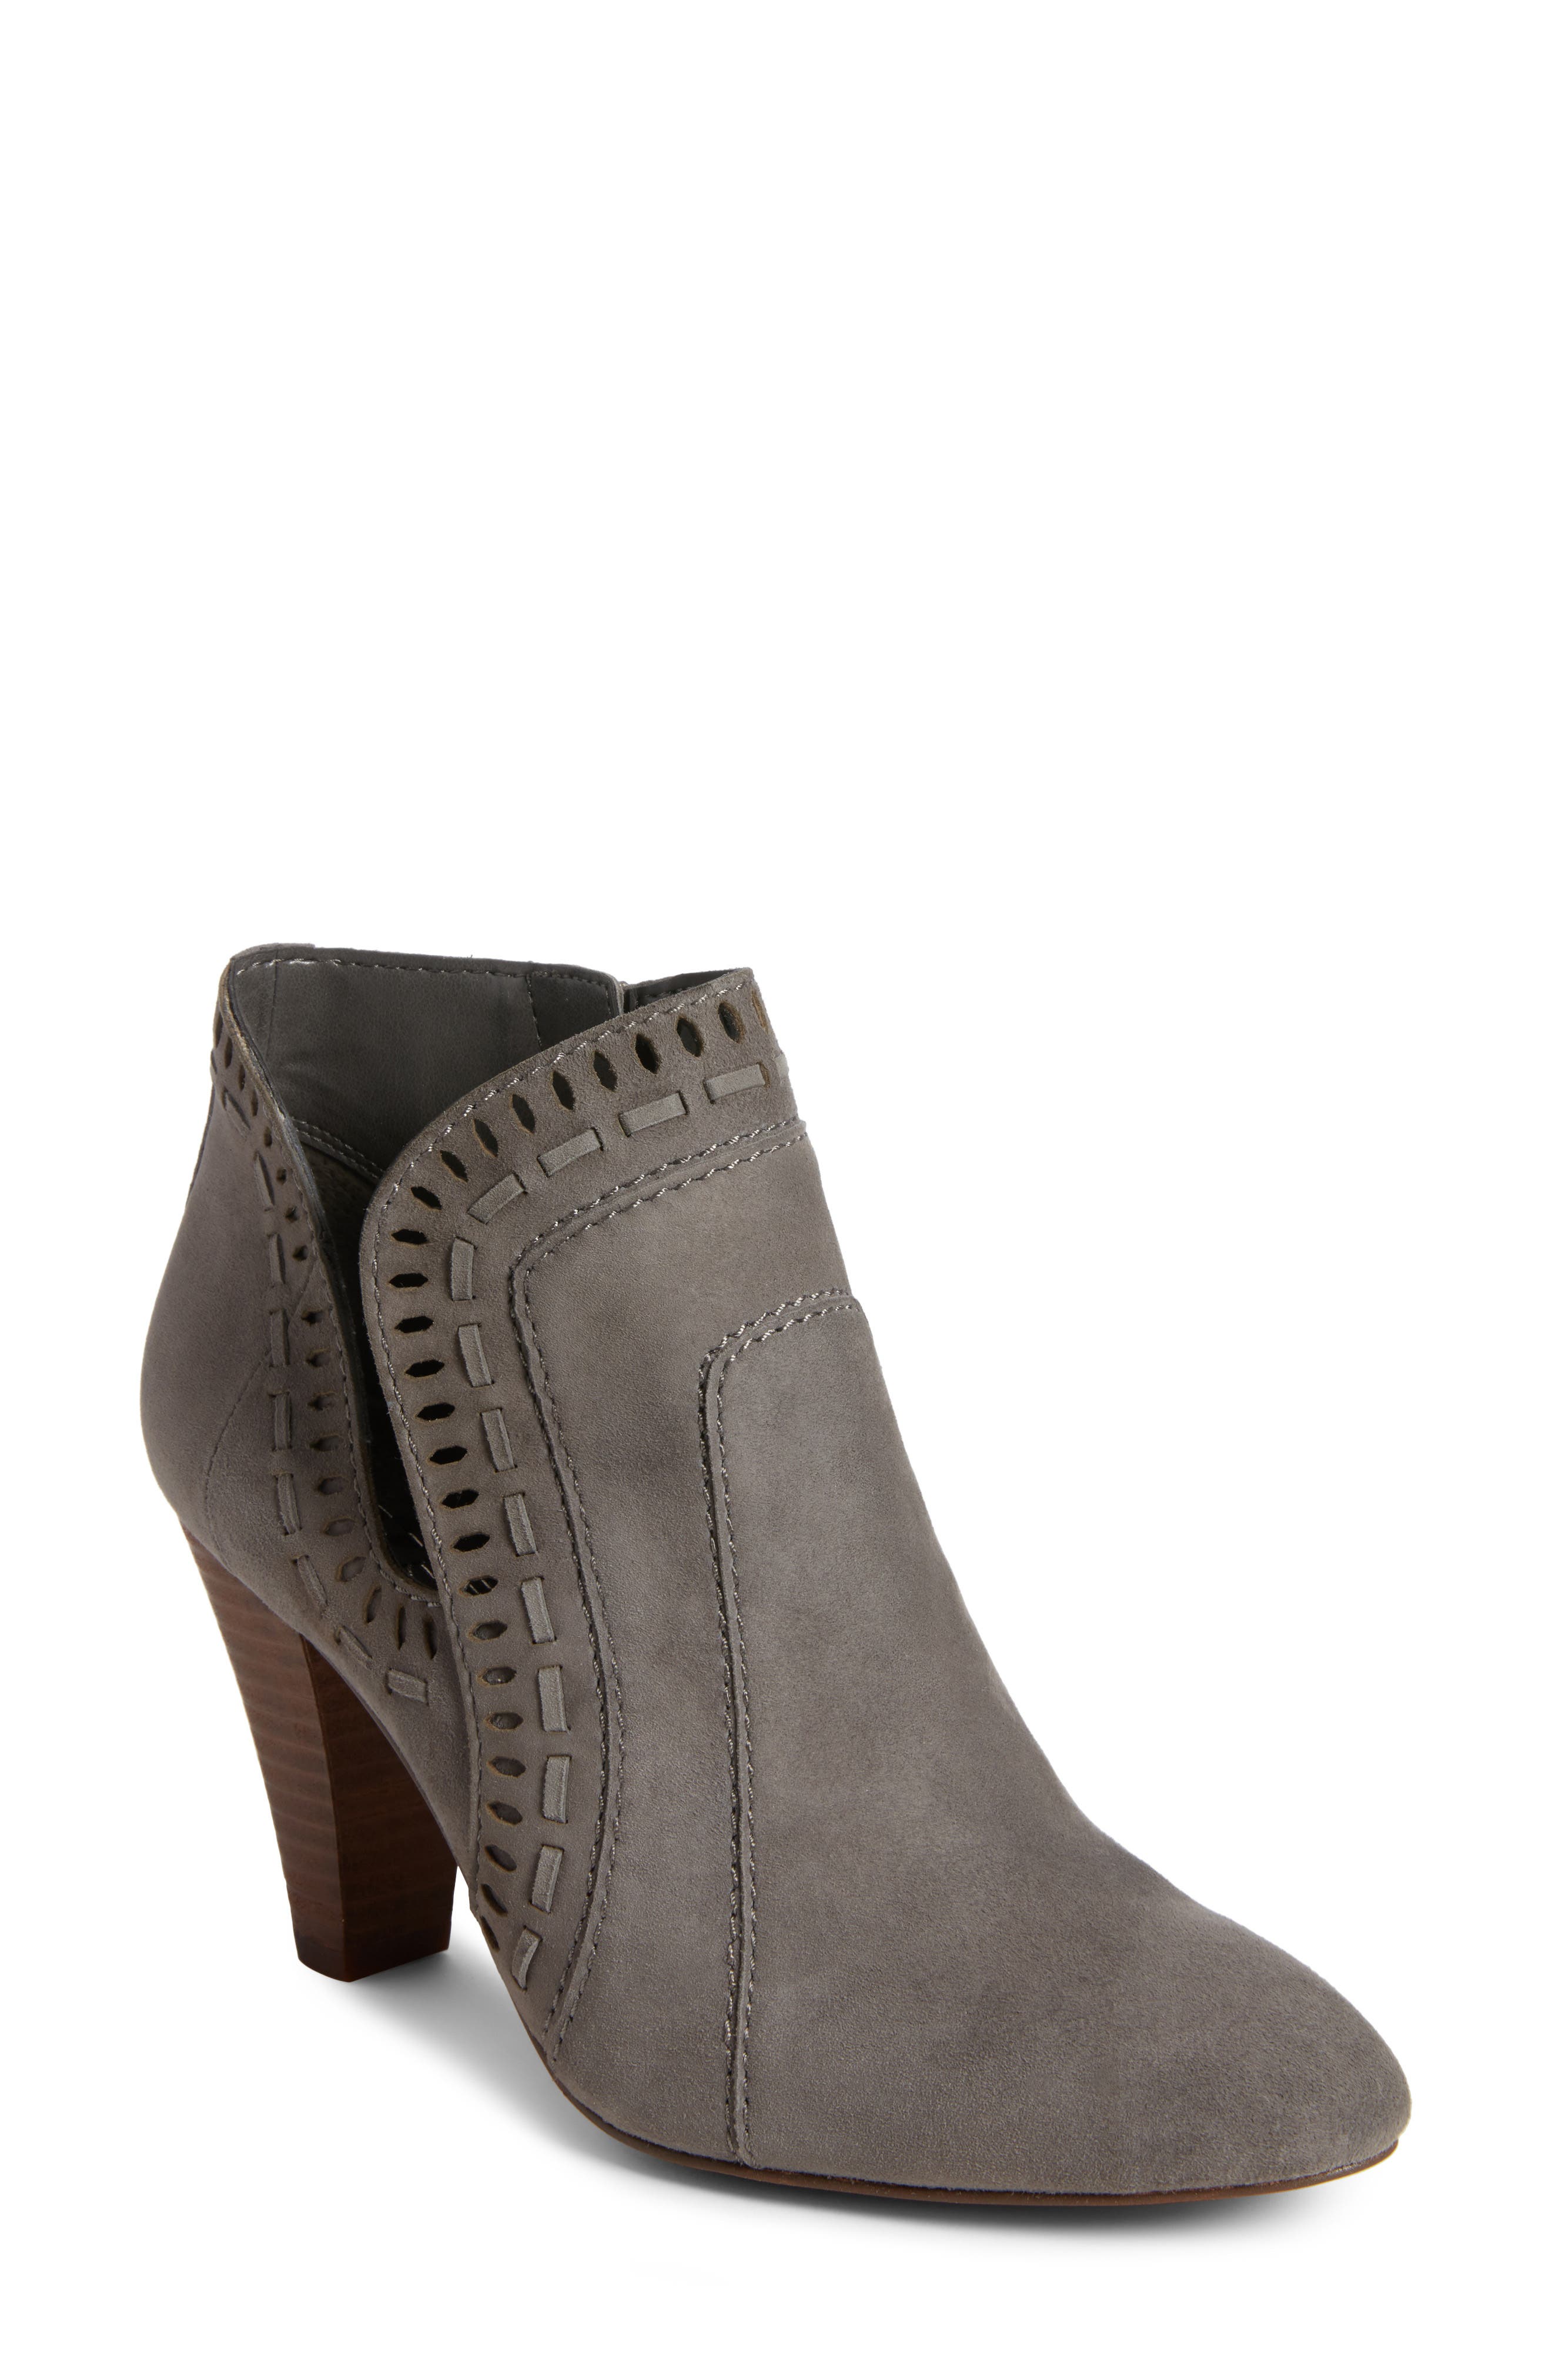 vince camuto shoes nordstrom rack